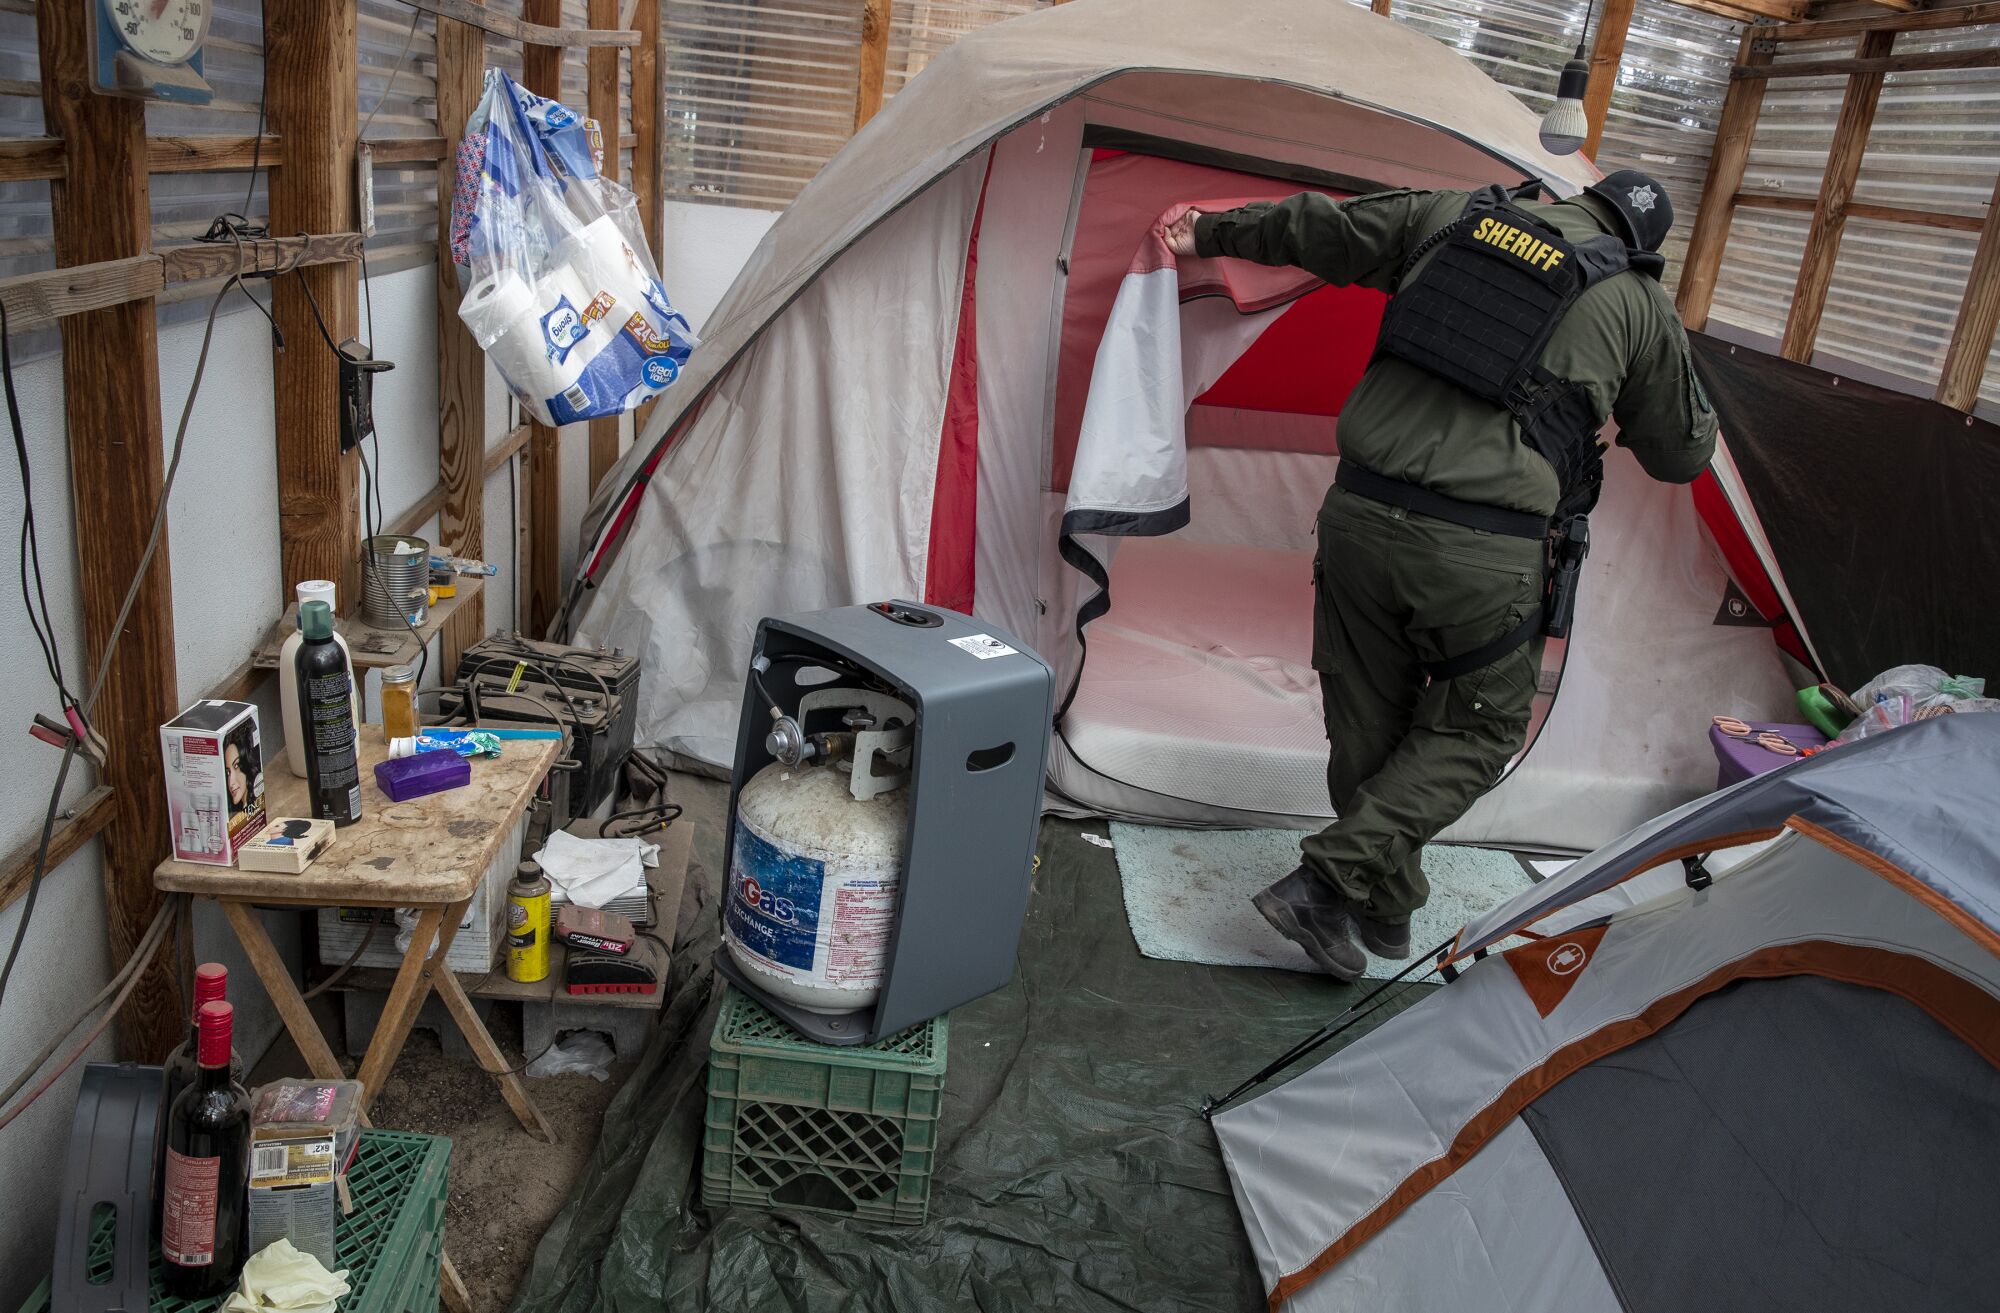 A sheriff's deputy searches a tent on an unlicensed cannabis farm.